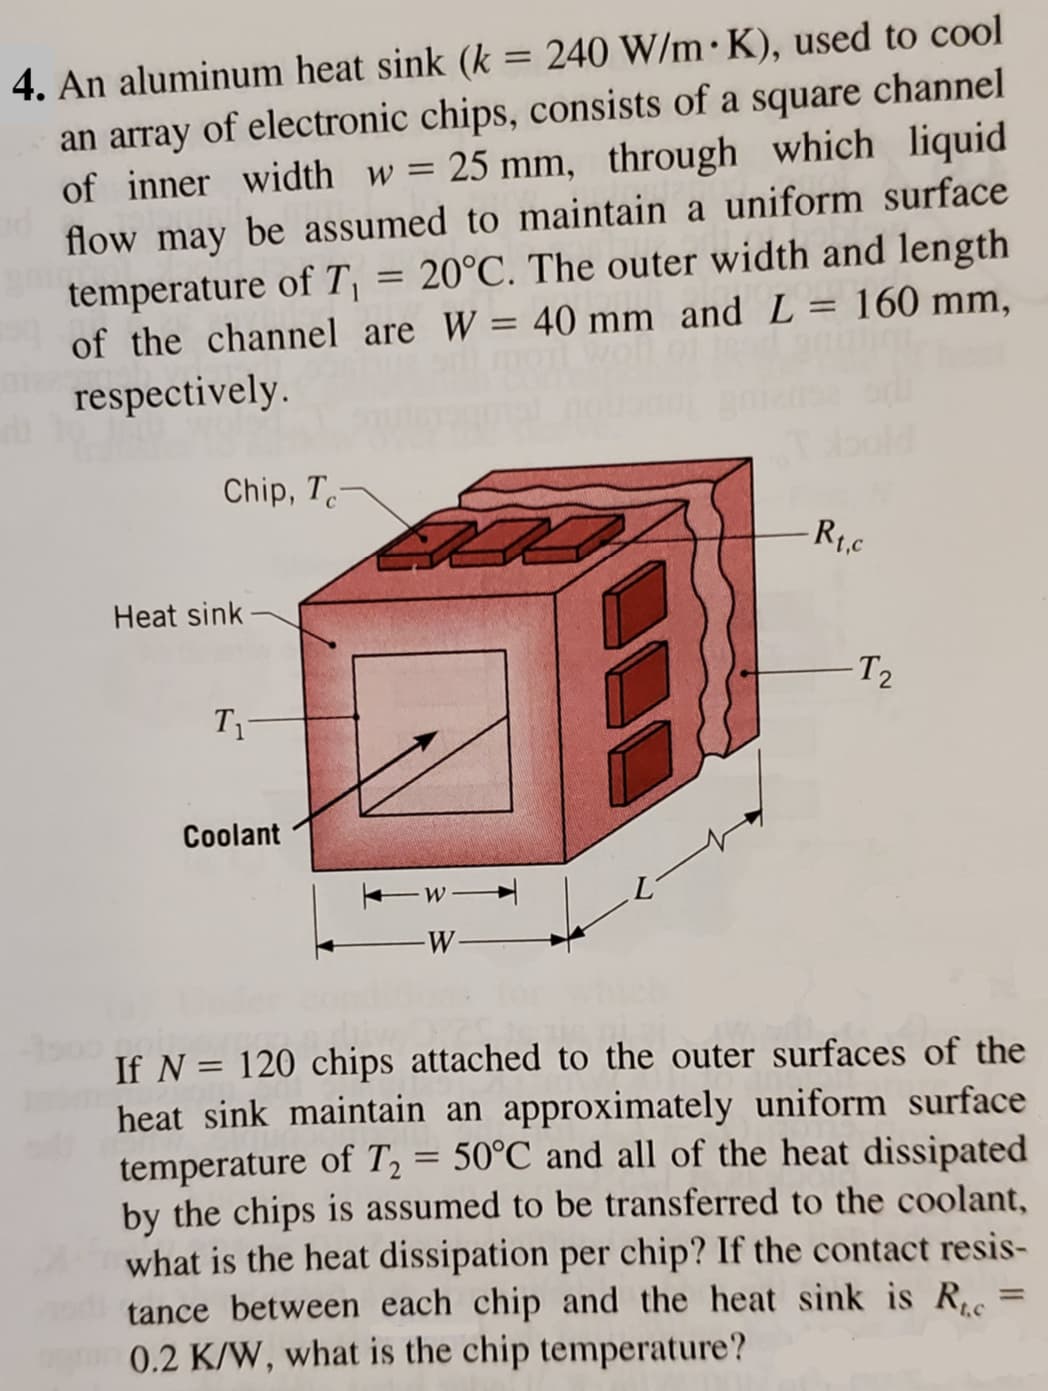 4. An aluminum heat sink (k = 240 W/m K), used to cool
an array of electronic chips, consists of a square channel
of inner width w = 25 mm, through which liquid
flow may be assumed to maintain a uniform surface
= 20°C. The outer width and length
temperature of T₁
of the channel are W = 40 mm and L = 160 mm,
respectively.
Chip, Tc-
Heat sink
T₁
Coolant
-W-
-W-
-Rt.c
-T₂
If N = 120 chips attached to the outer surfaces of the
heat sink maintain an approximately uniform surface
temperature of T₂ = 50°C and all of the heat dissipated
by the chips is assumed to be transferred to the coolant,
what is the heat dissipation per chip? If the contact resis-
tance between each chip and the heat sink is Ruc
0.2 K/W, what is the chip temperature?
=